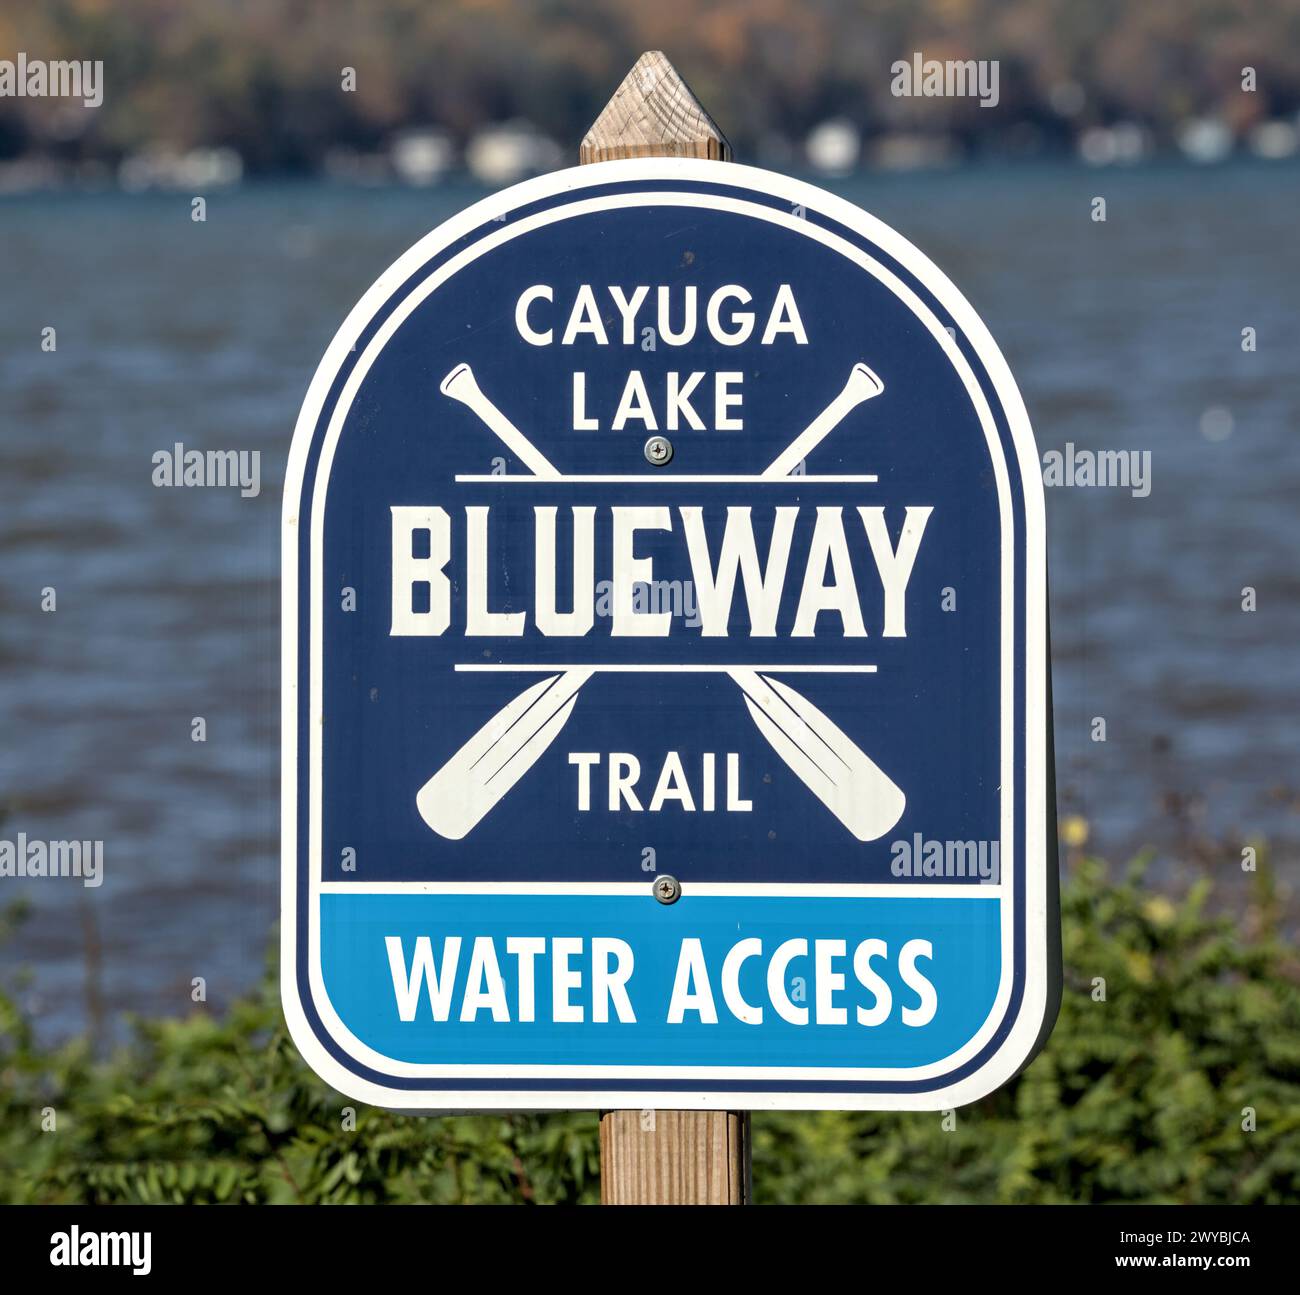 cayuga lake blueway trail water access sign in public park (finger lakes region of upstate new york) travel, tourism, ny state (ithaca hiking path nea Stock Photo